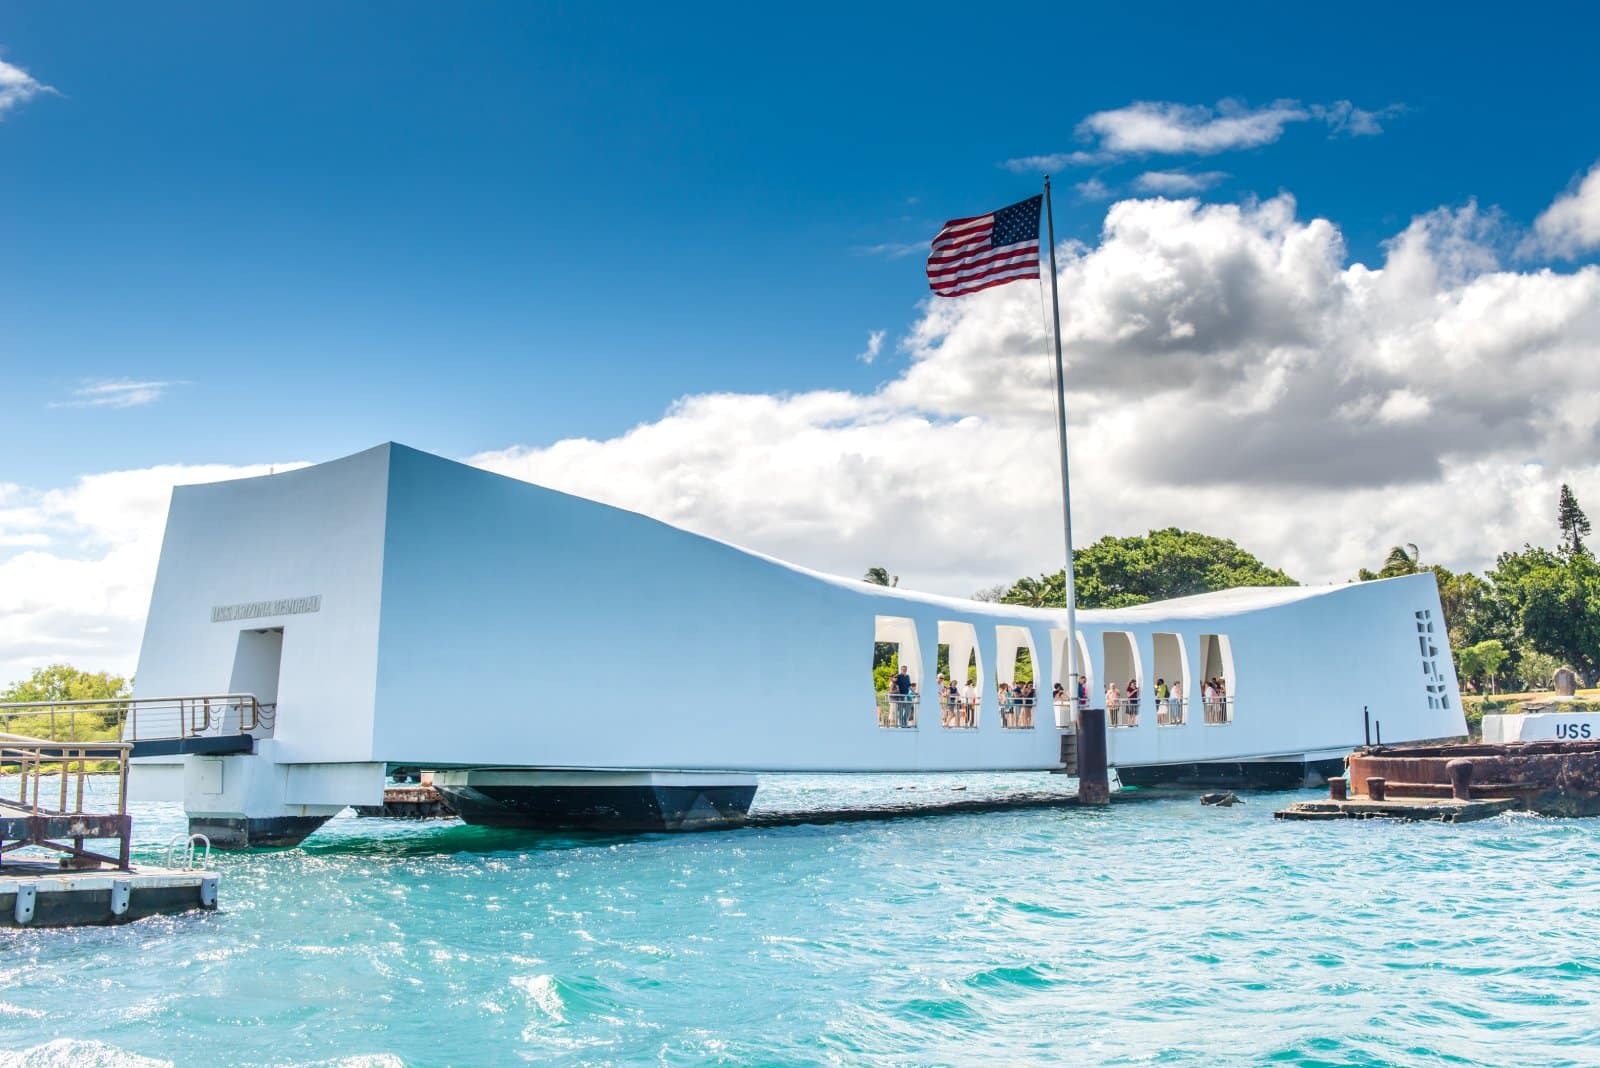 <p class="wp-caption-text">Image Credit: Shutterstock / Pung</p>  <p>This memorial honors the lives lost during the December 7, 1941, Japanese attack on Pearl Harbor, which precipitated the United States’ entry into World War II. The sunken USS Arizona remains a somber reminder of the sacrifices of war.</p>